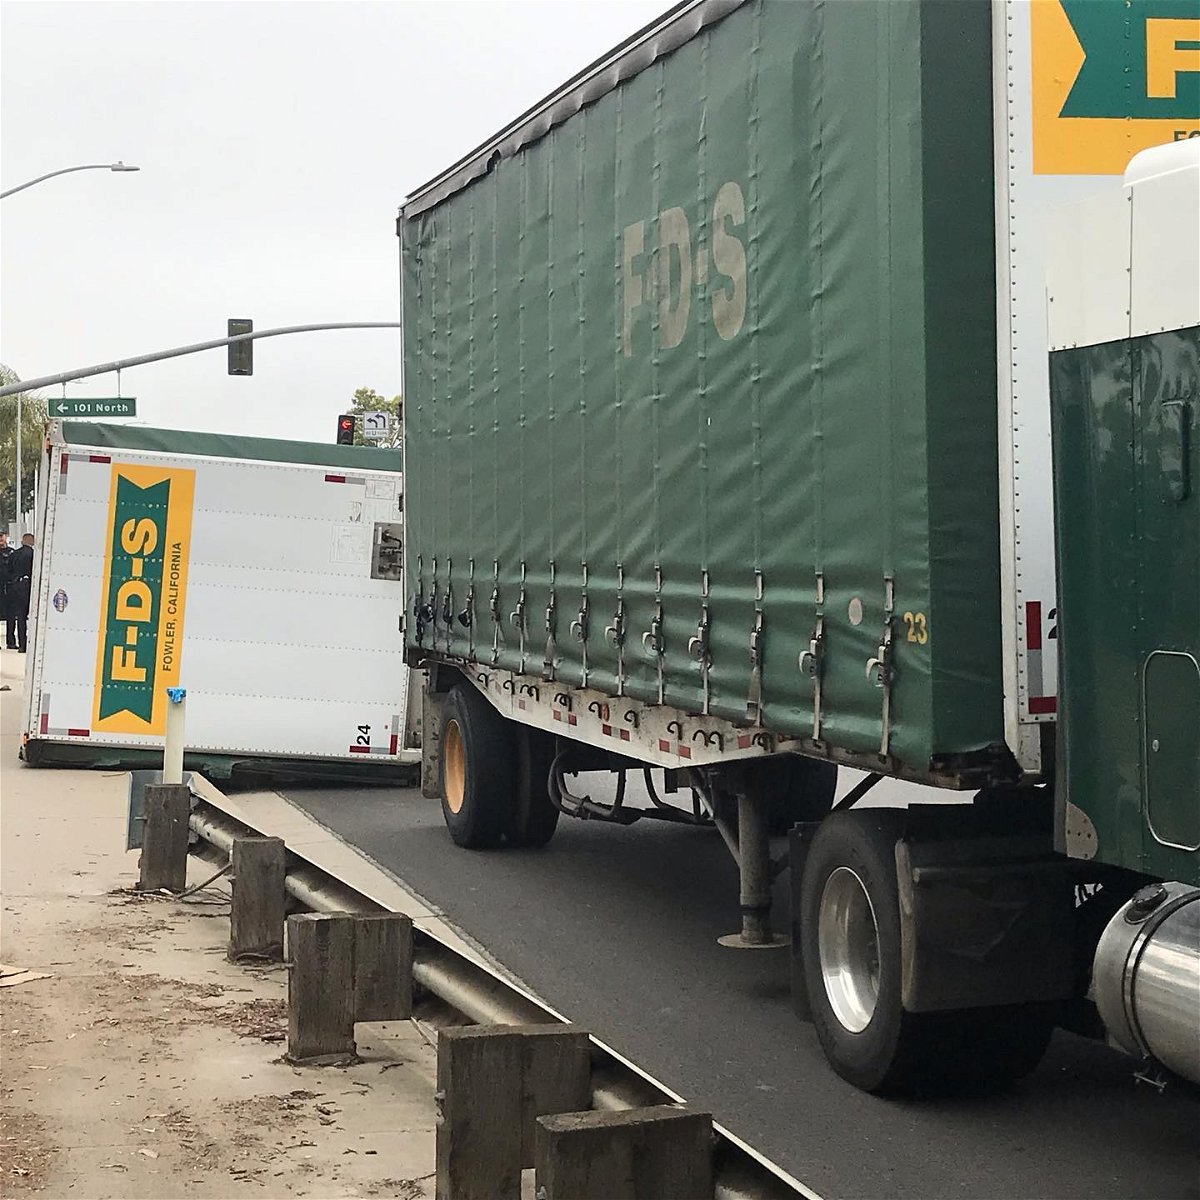 A trailer toppled over in Santa Maria, causing a traffic delay Friday morning. 